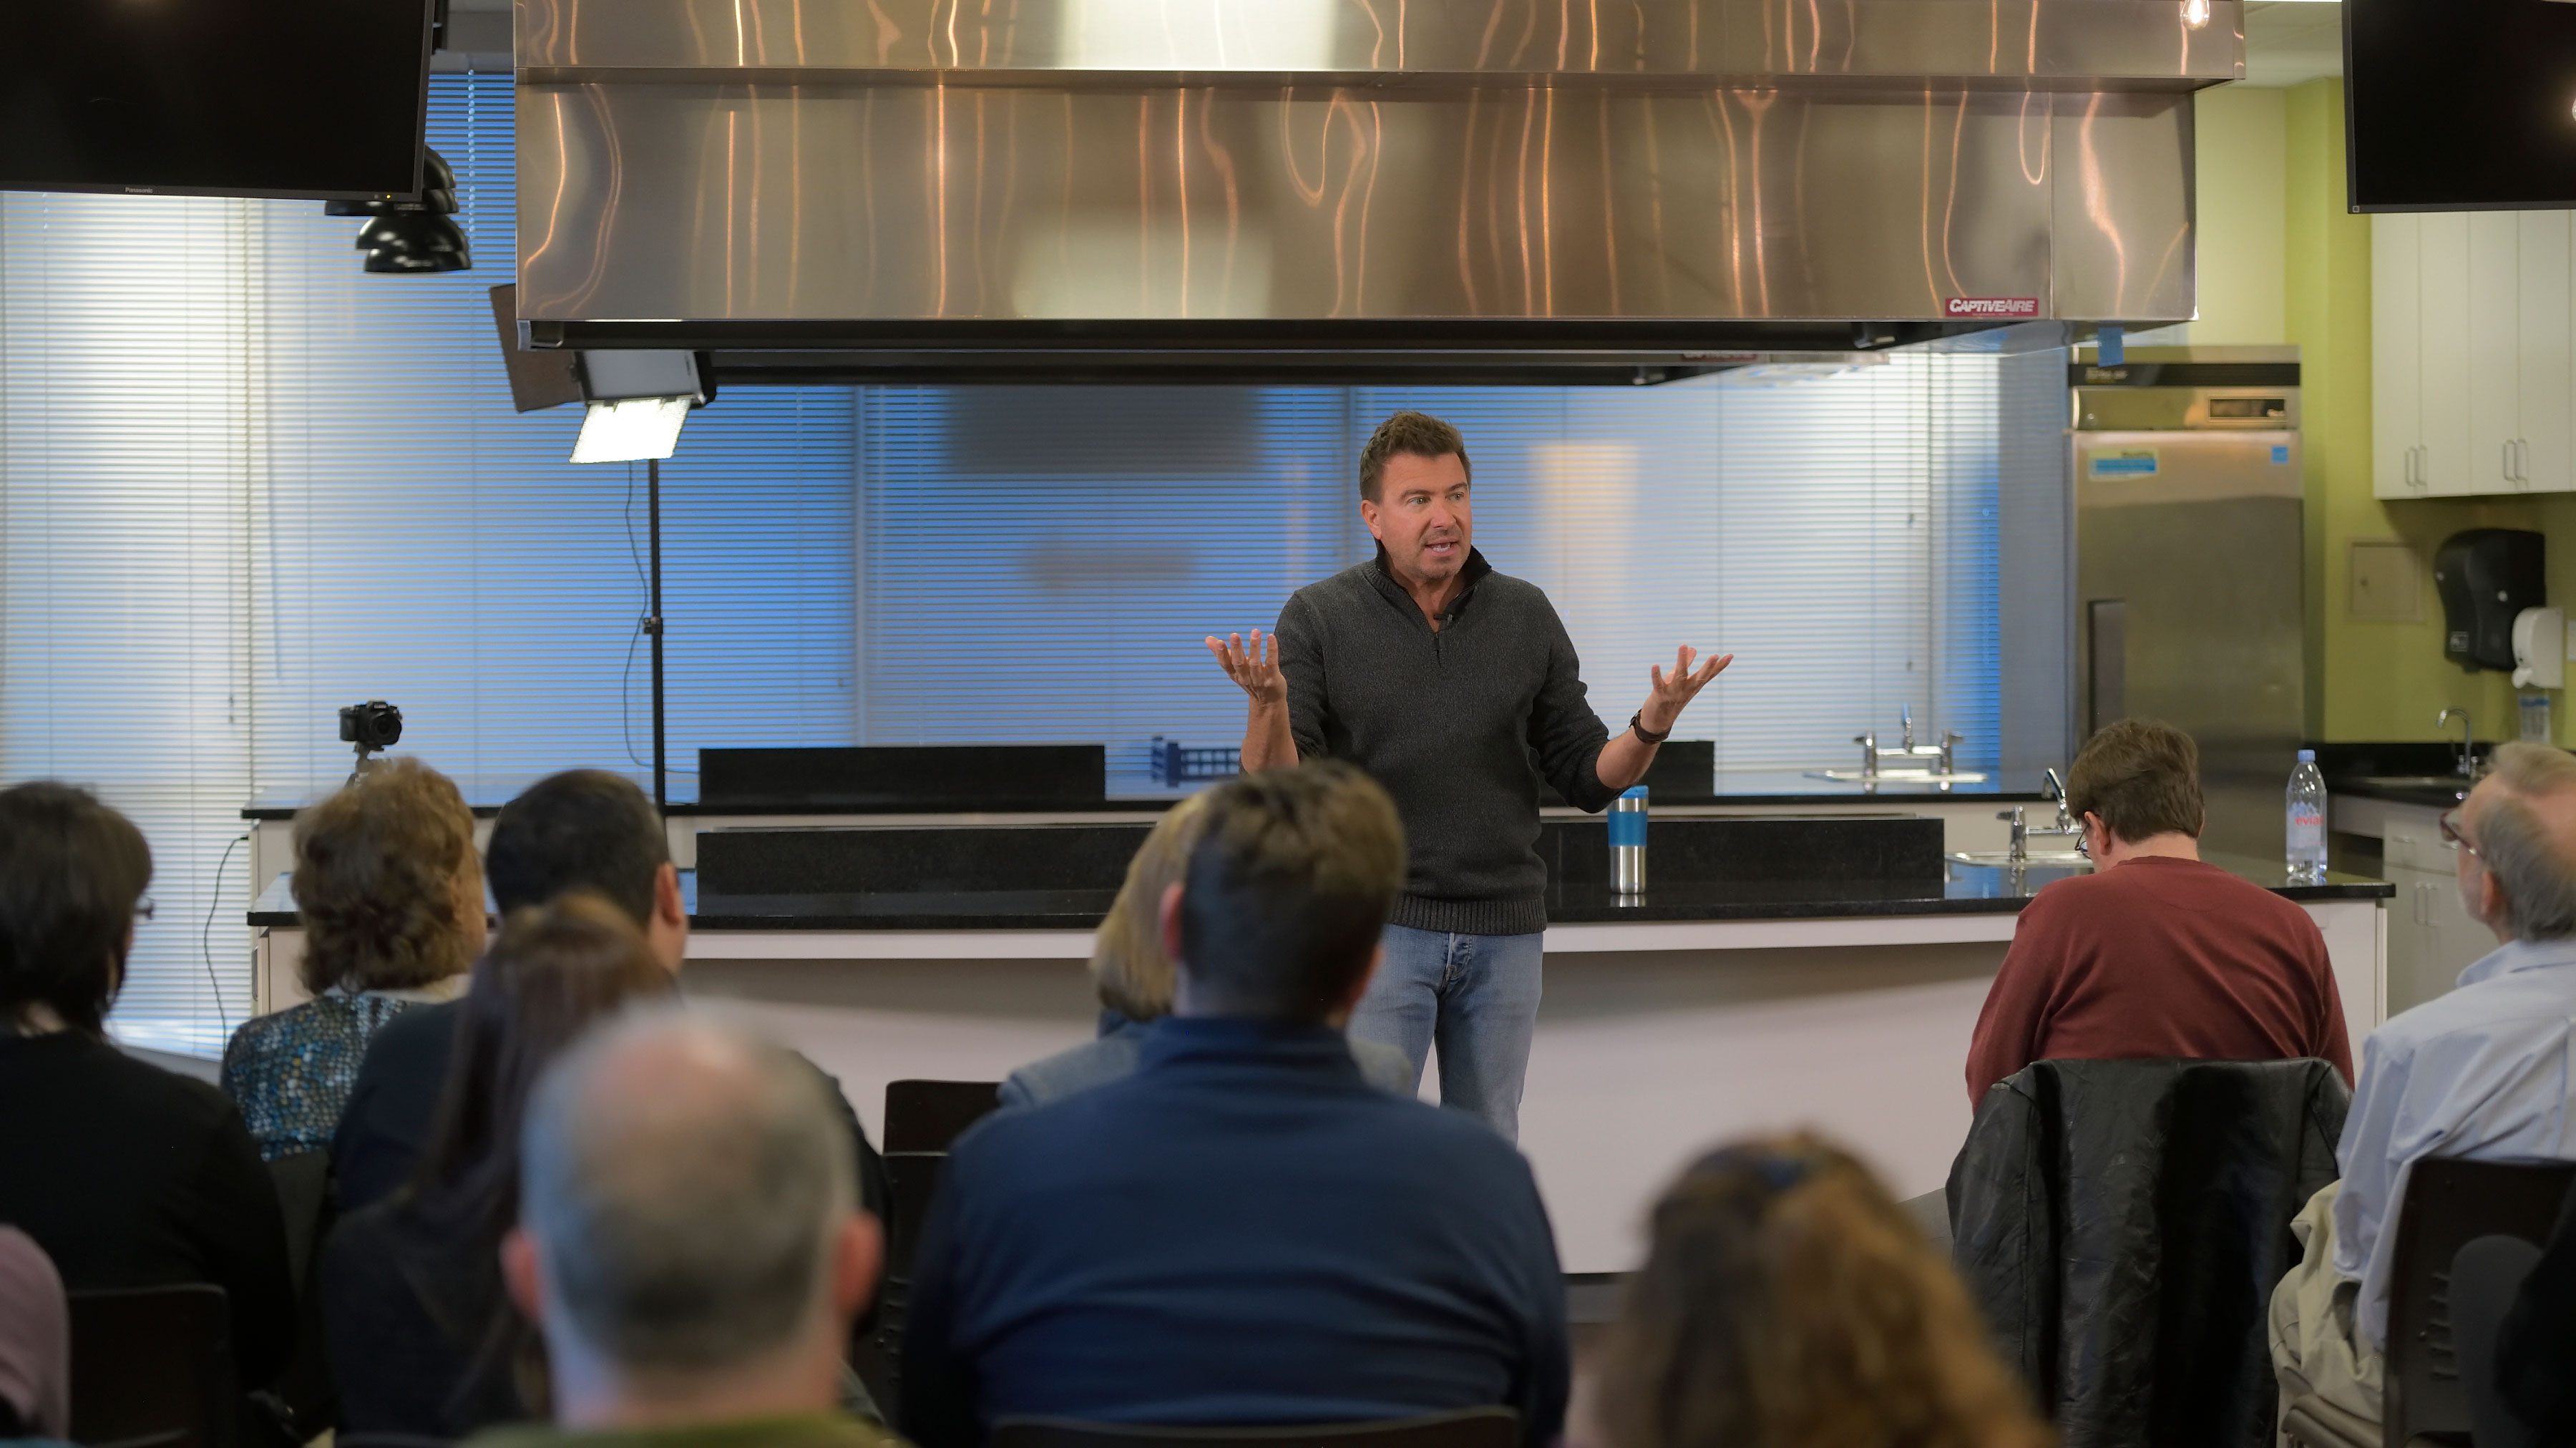 The Culinary Arts Institute held a preview event for its proposed International Study Program with guest speaker, Jack Maxwell, host of Travel Channel's "Booze Traveler." Photo by David DeBalko